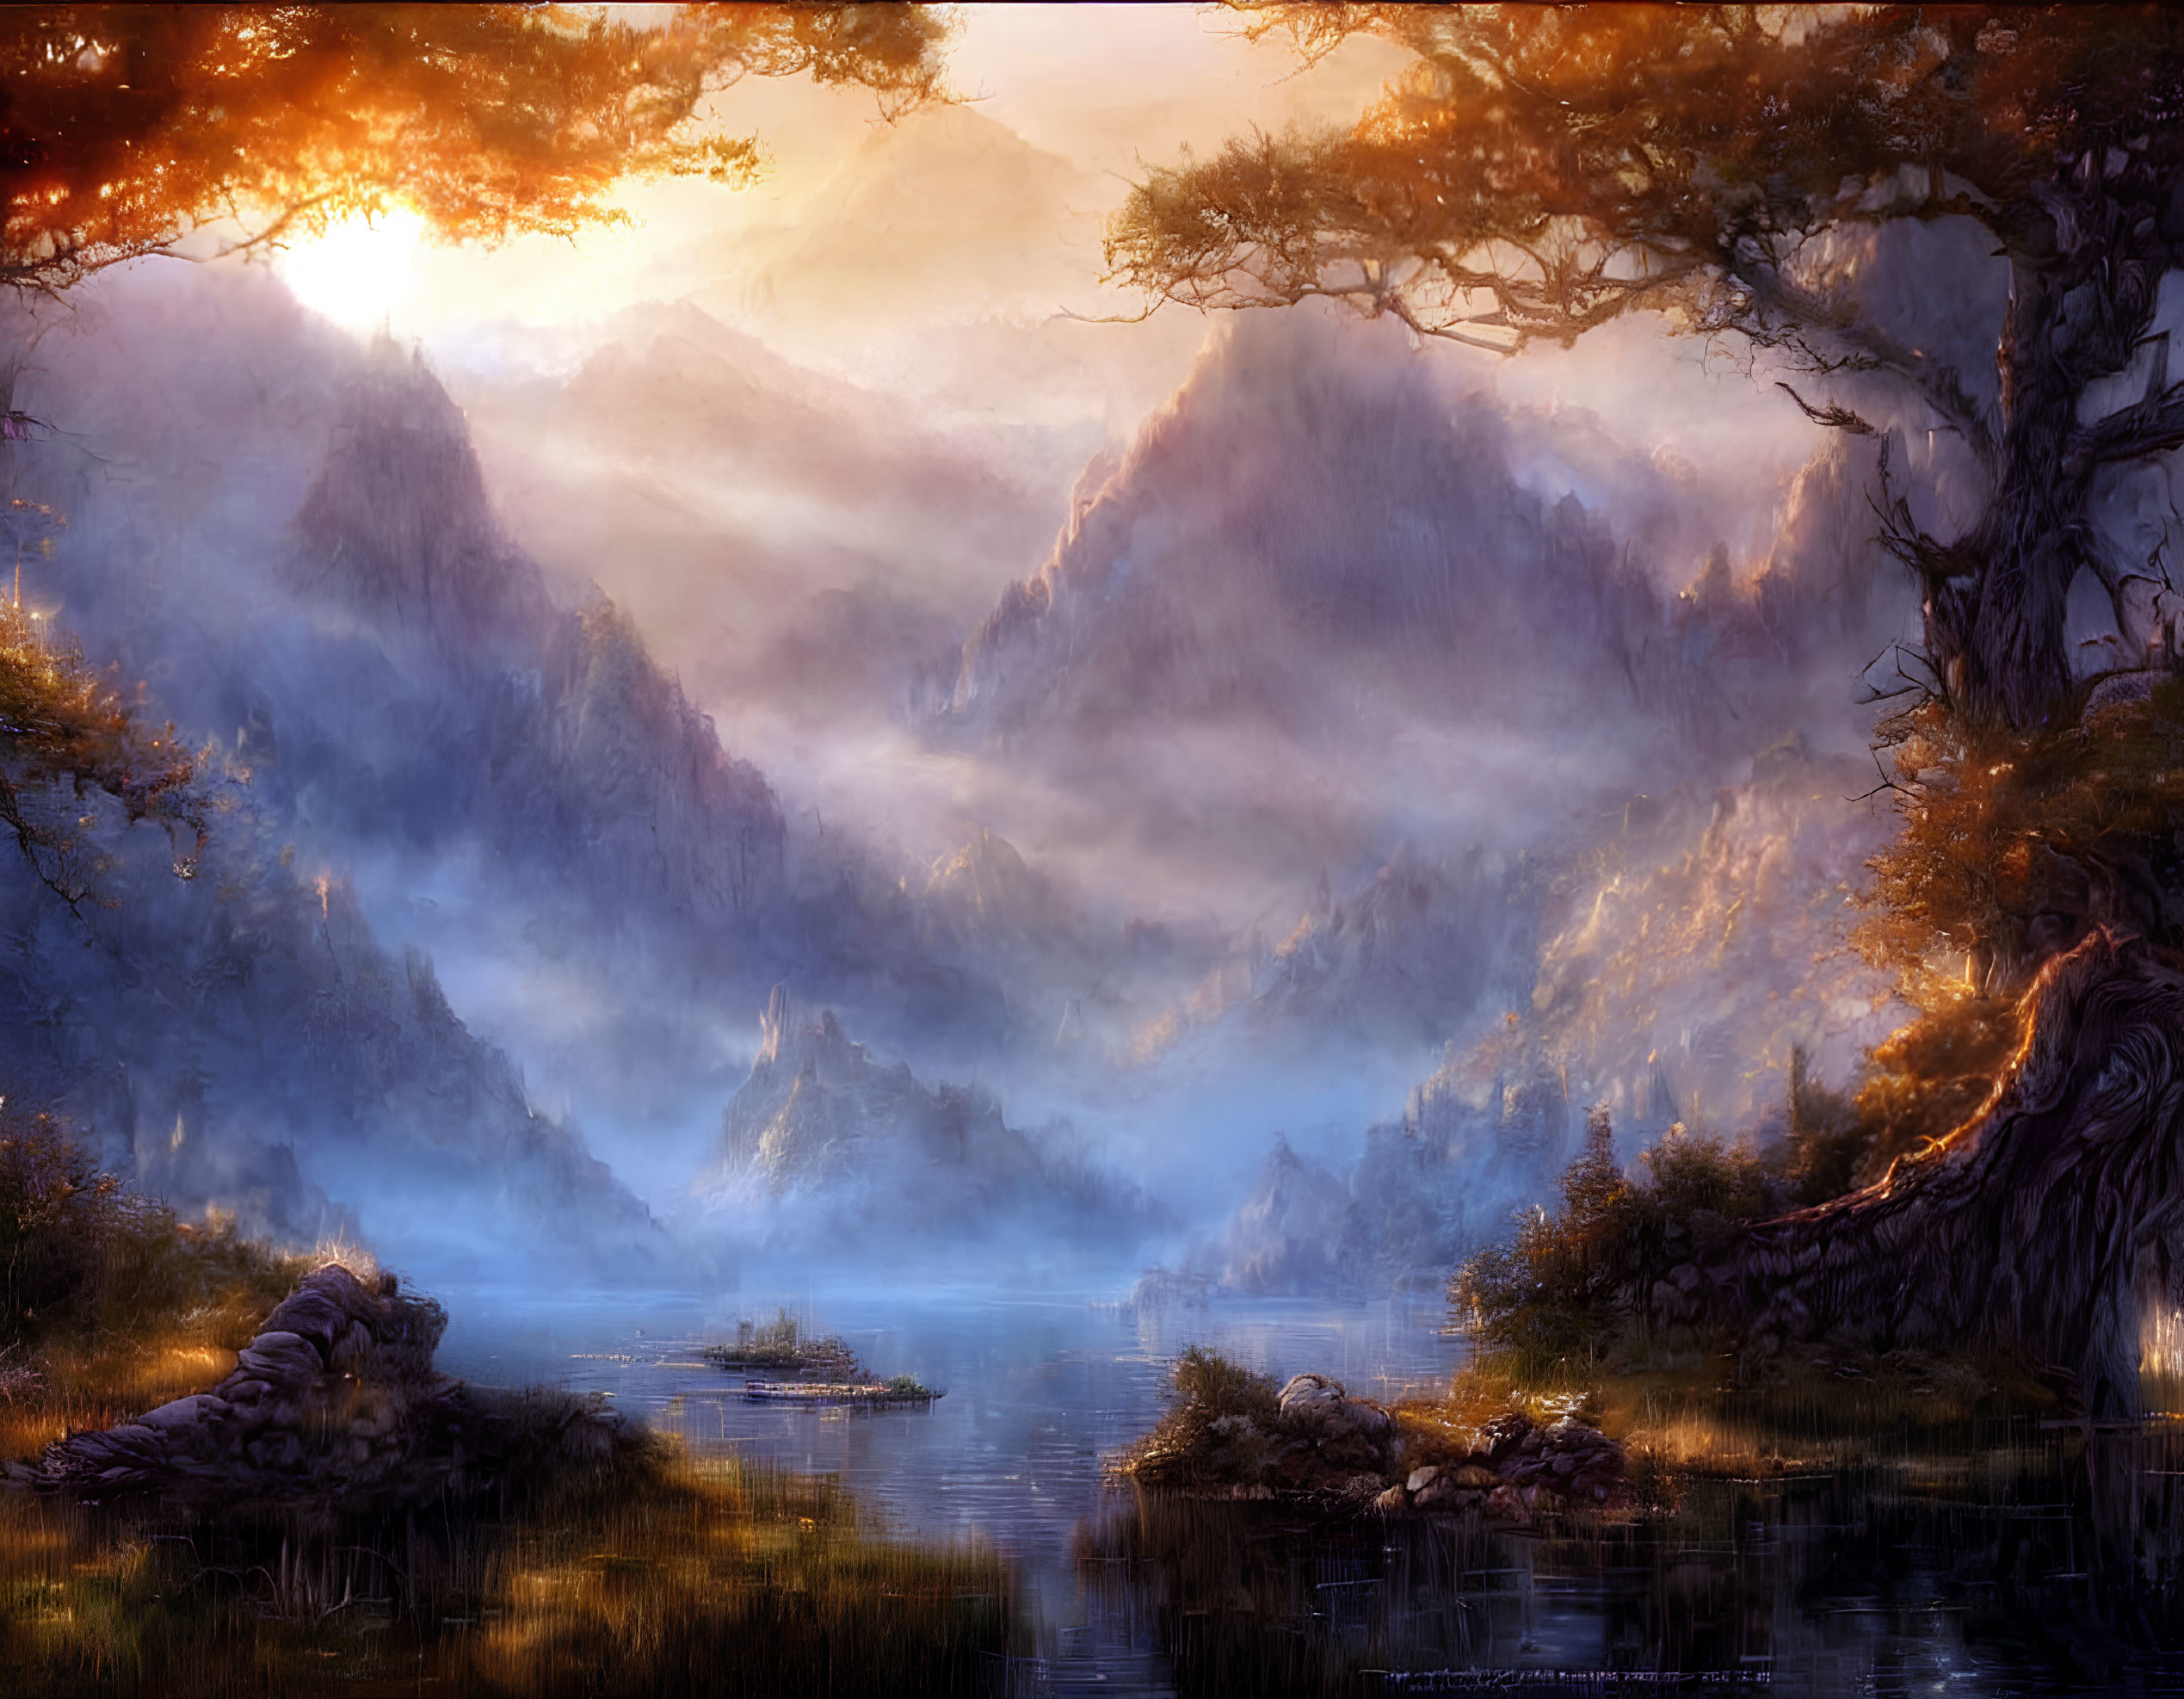 Serene fantasy landscape with glowing sunset, mountains, reflective water, ancient trees